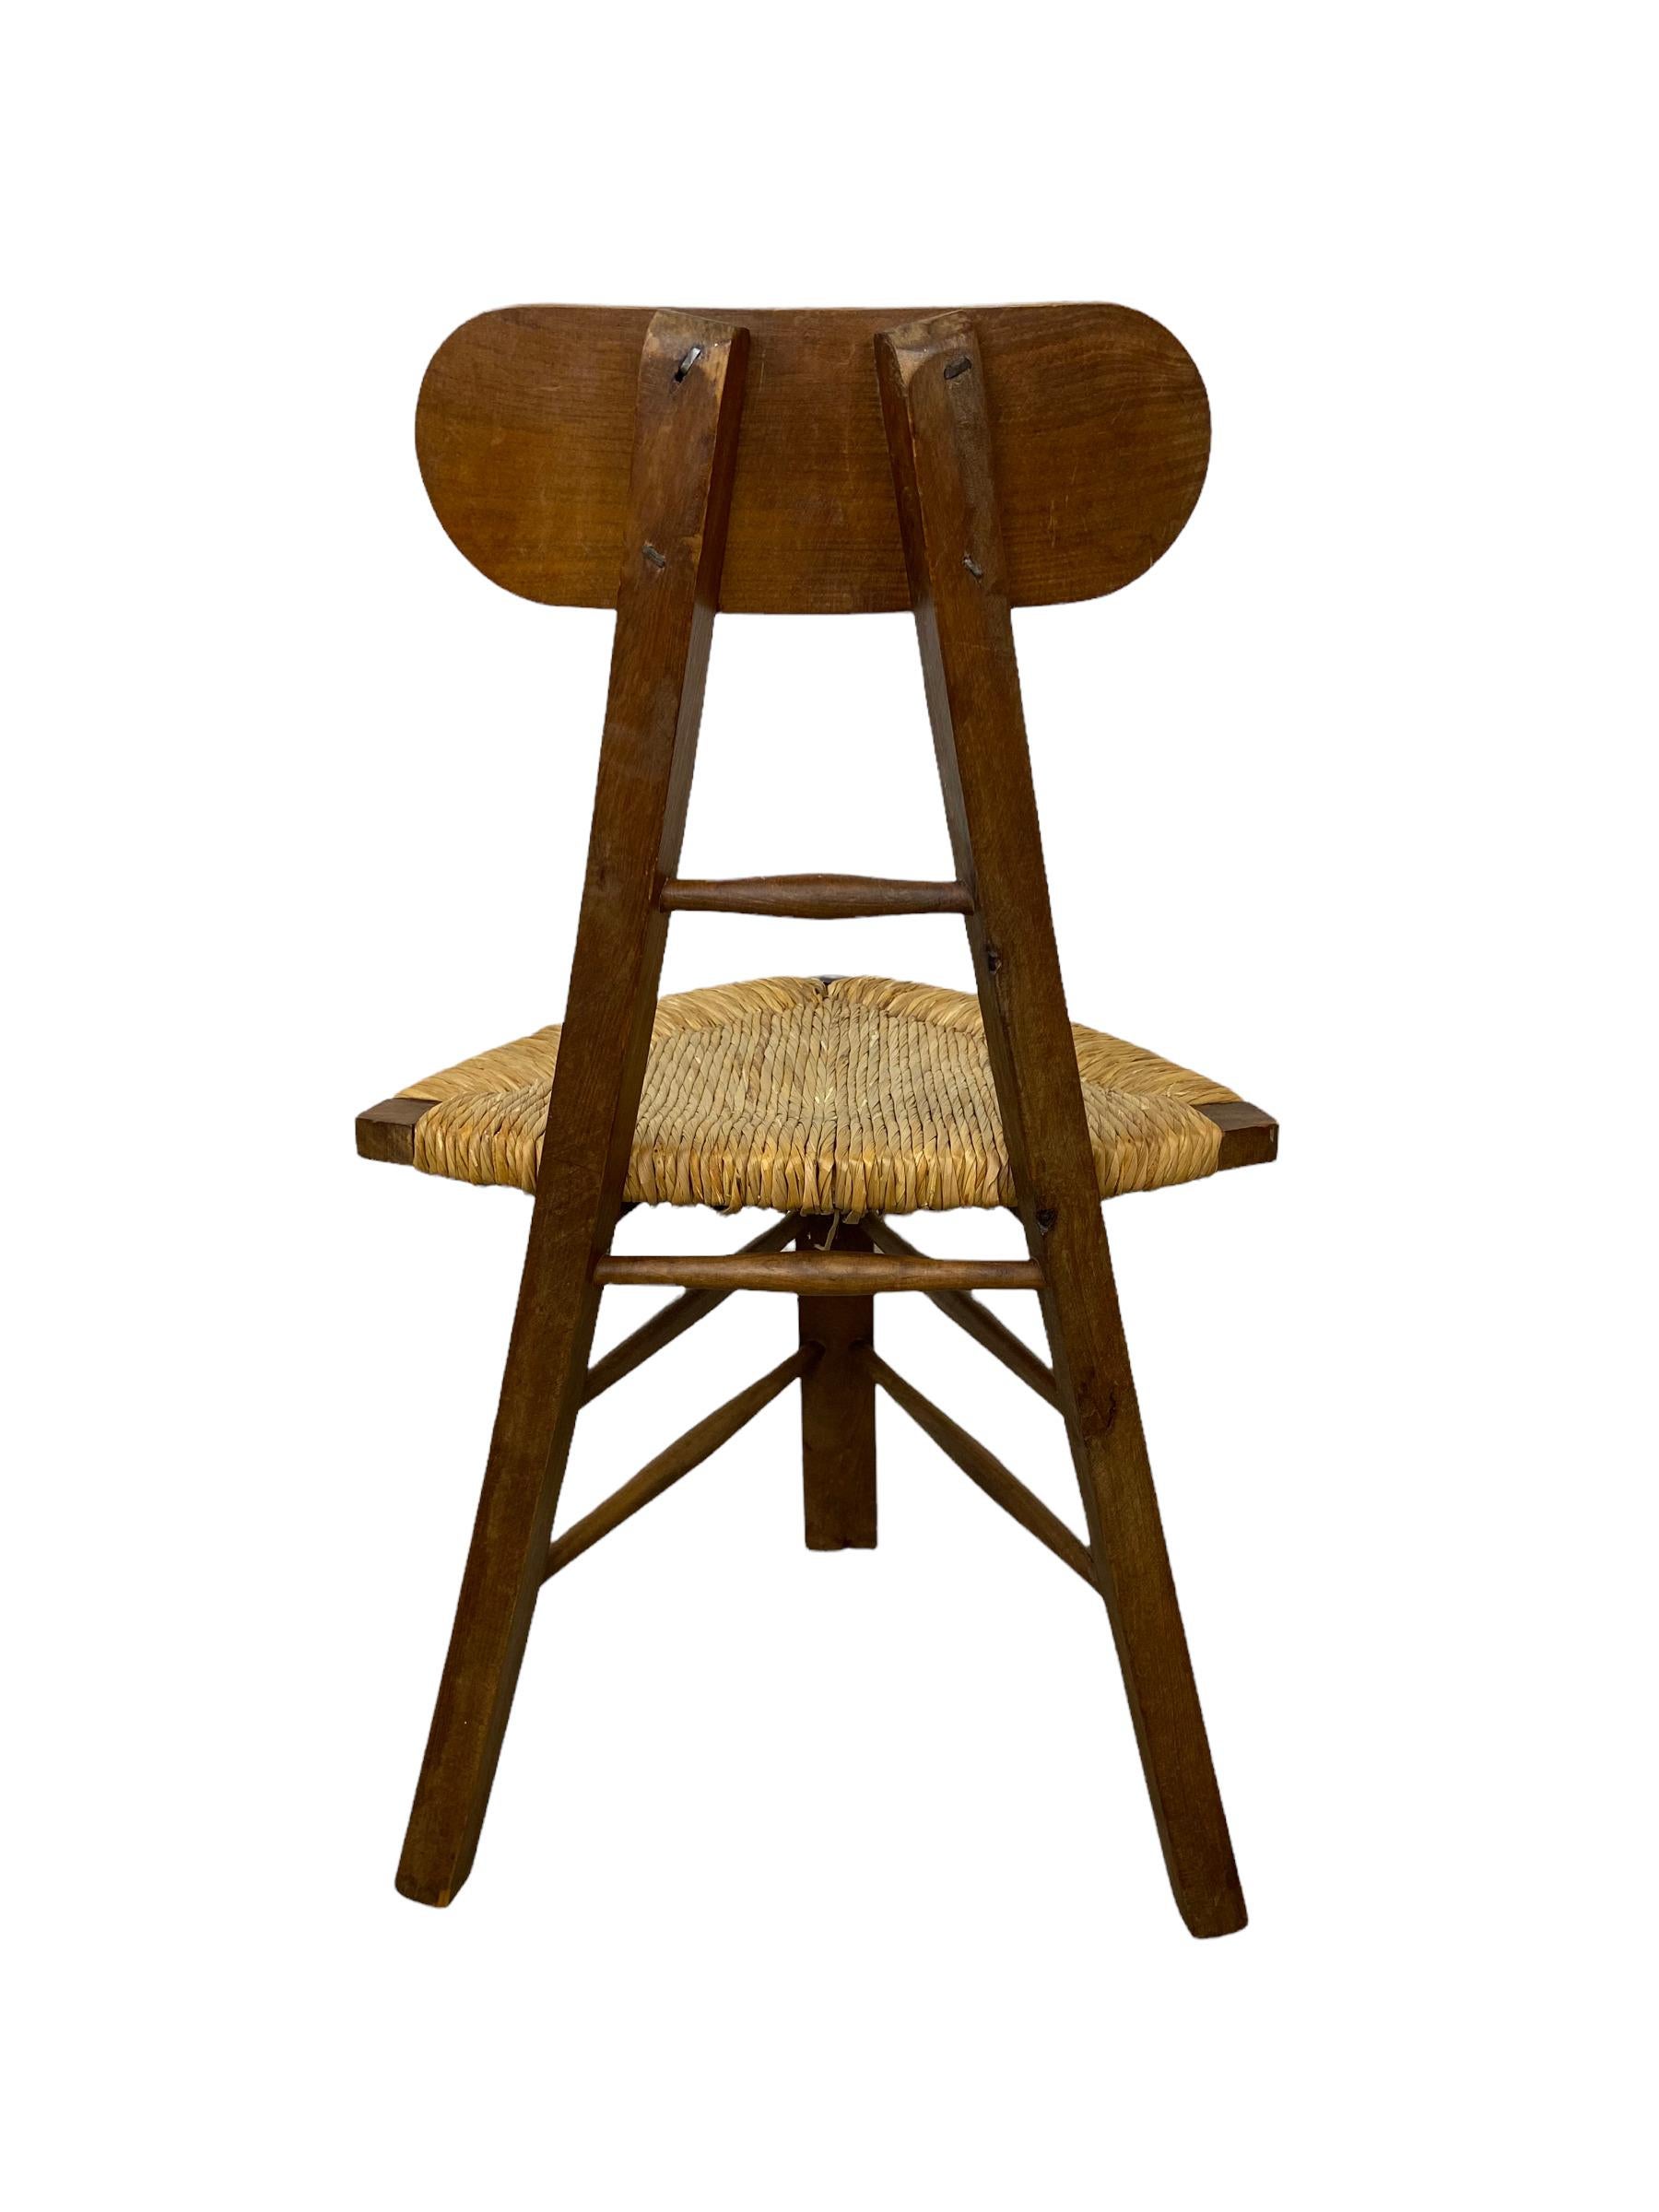 Rush Tripod Chair French Fifties Design For Sale